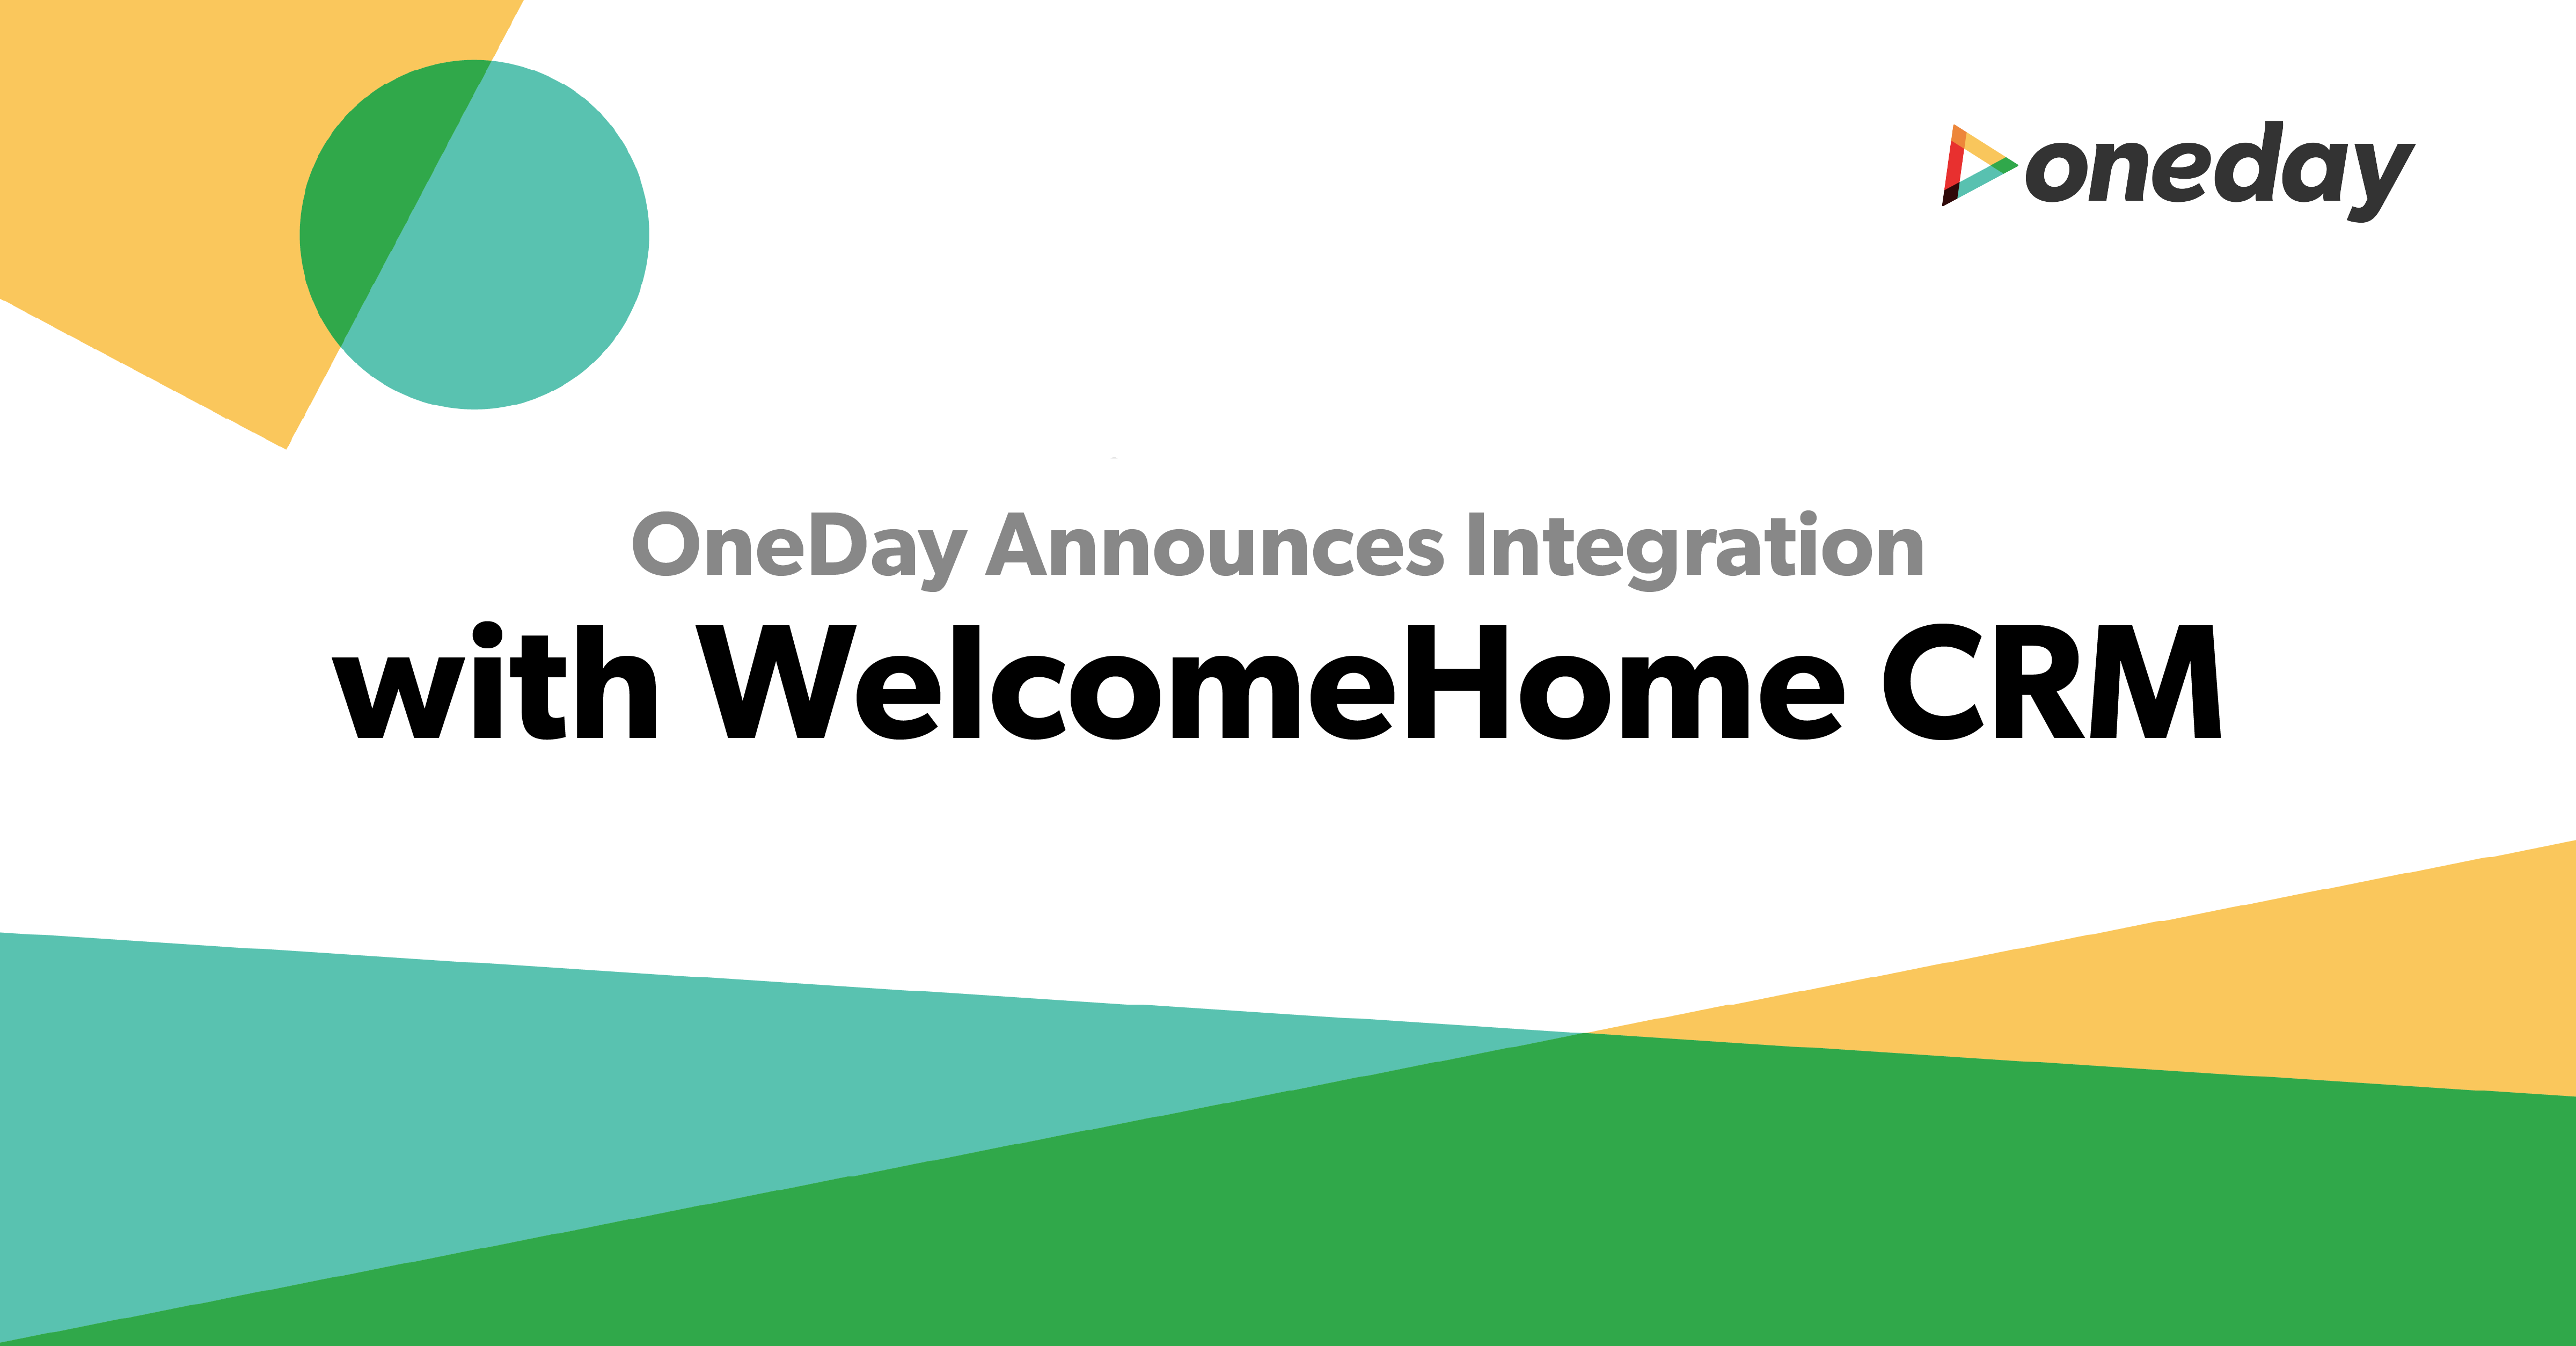 OneDay Announces Integration with WelcomeHome CRM